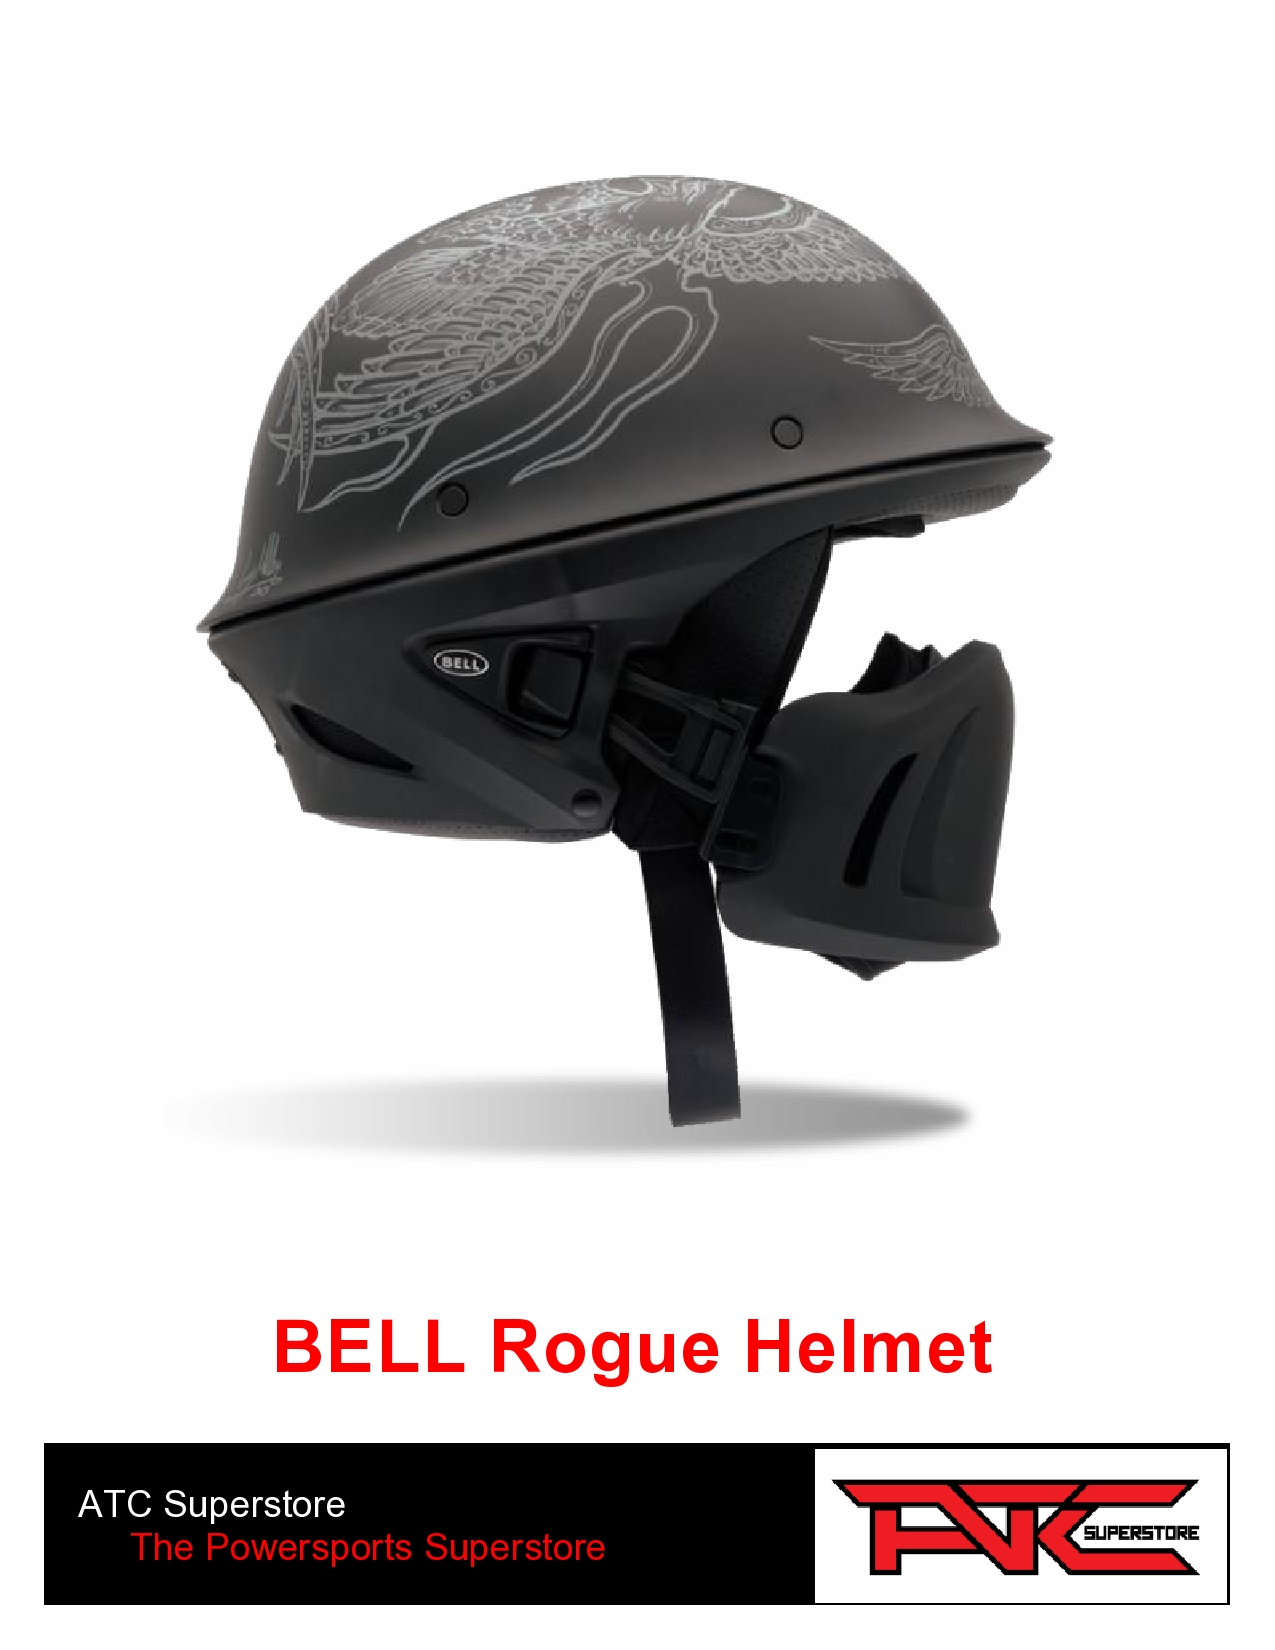 Мотошлем Bell Rogue. Шлем Bell Rogue Helmet. Шлем Eagle Racer. Шлем md901.